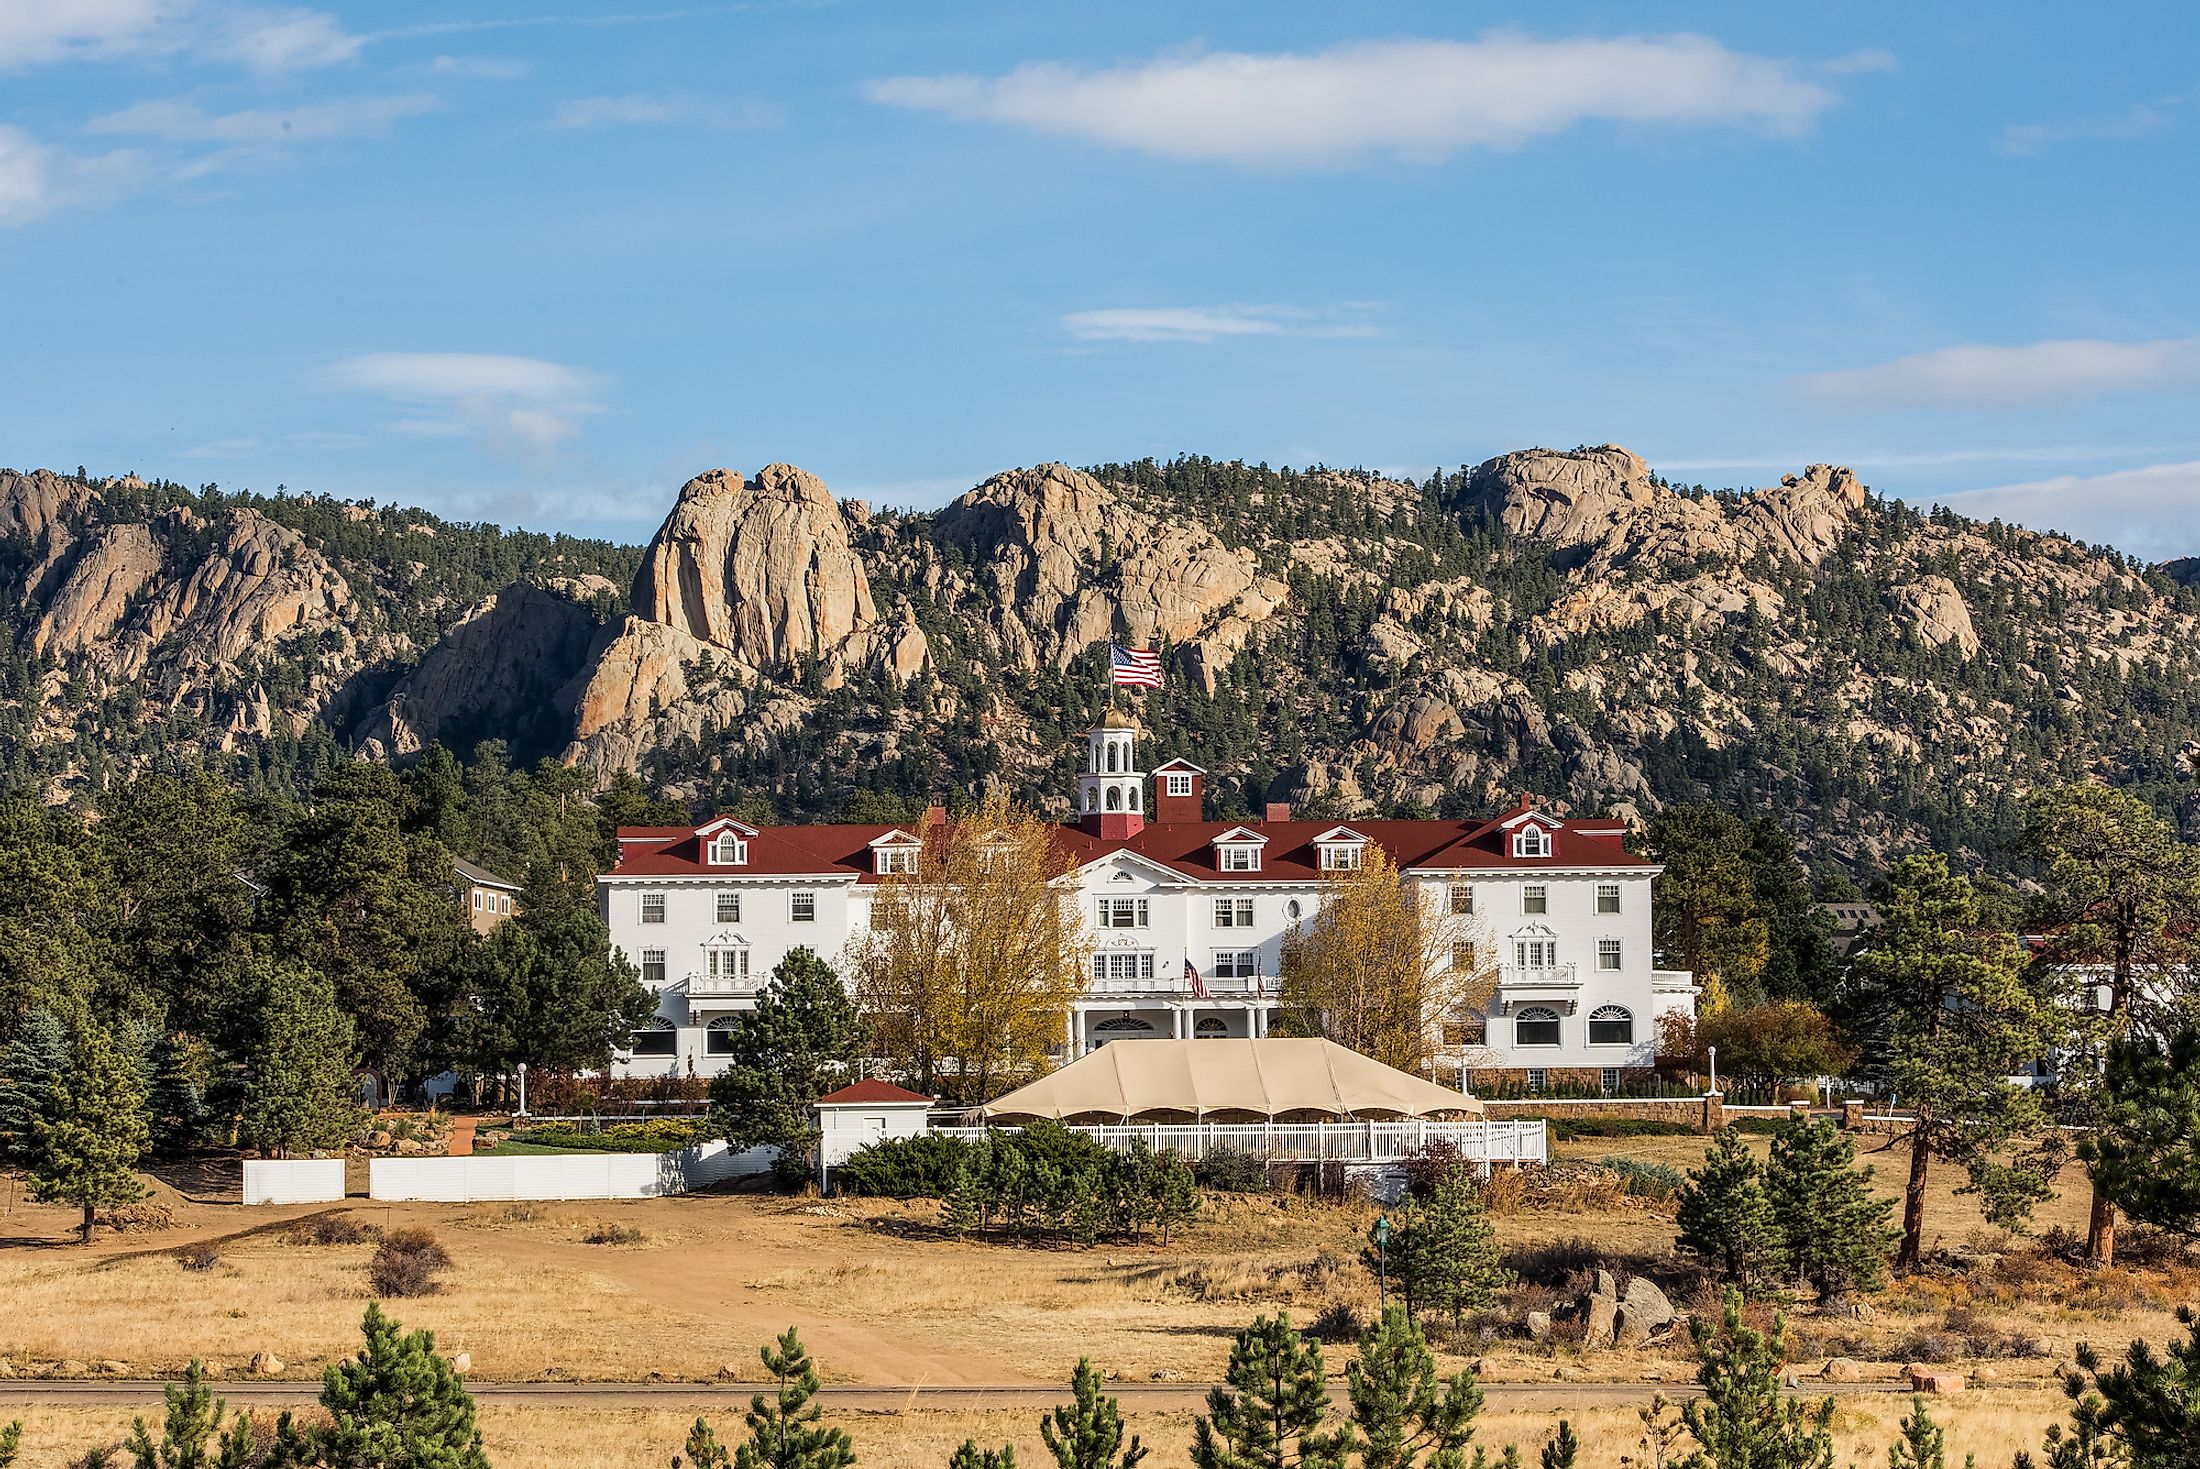 The historic Stanley Hotel is at the gateway to Rocky Mountain National Park. Editorial credit: Phillip Rubino / Shutterstock.com